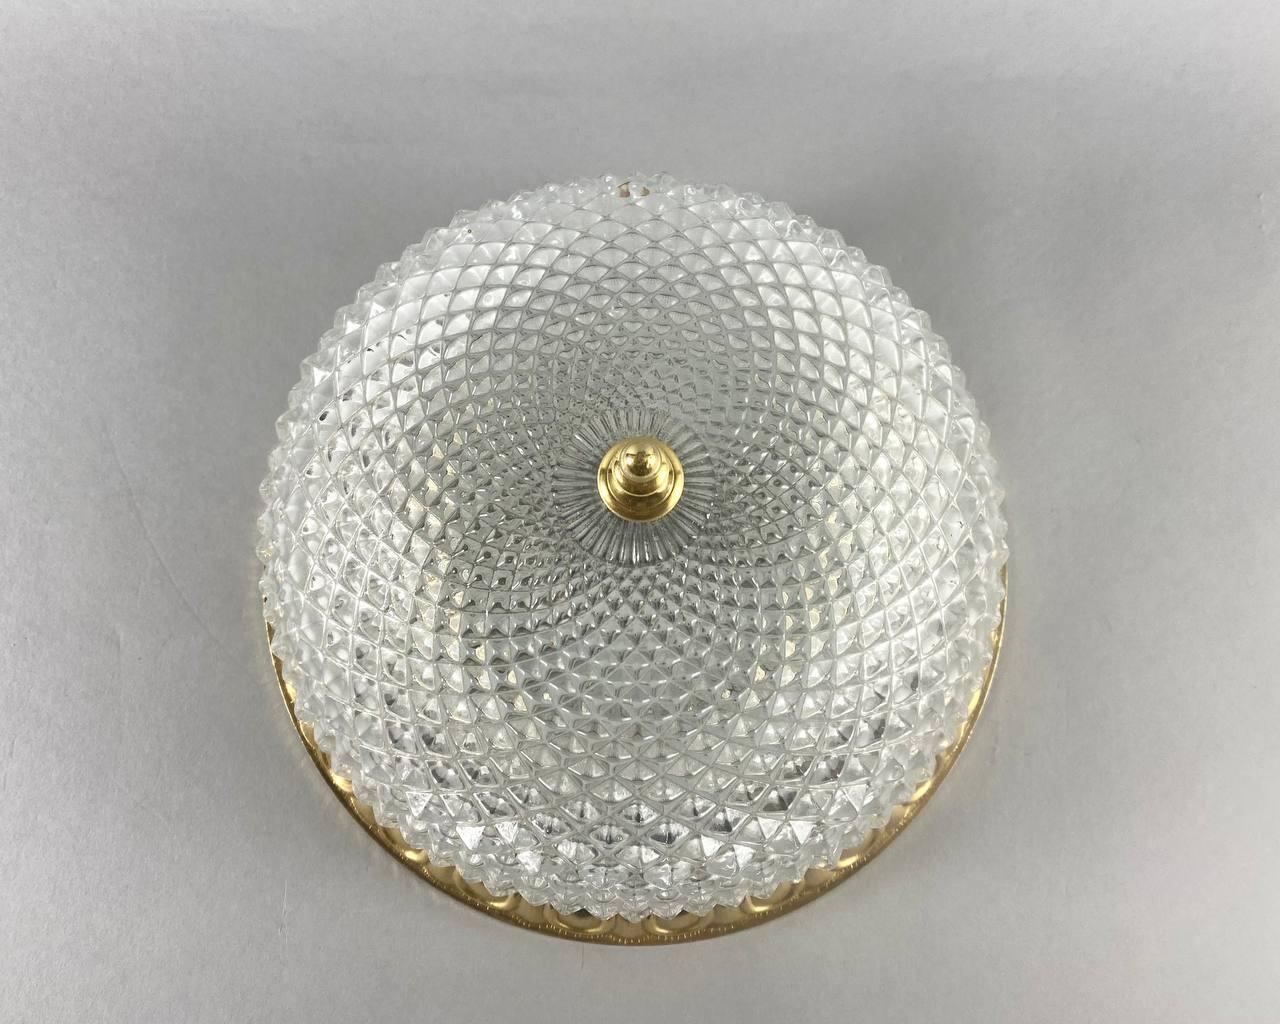 Luxurious Vintage Ceiling Lamp  Glass Shade In Gilt Bronze Fittings In Excellent Condition For Sale In Bastogne, BE